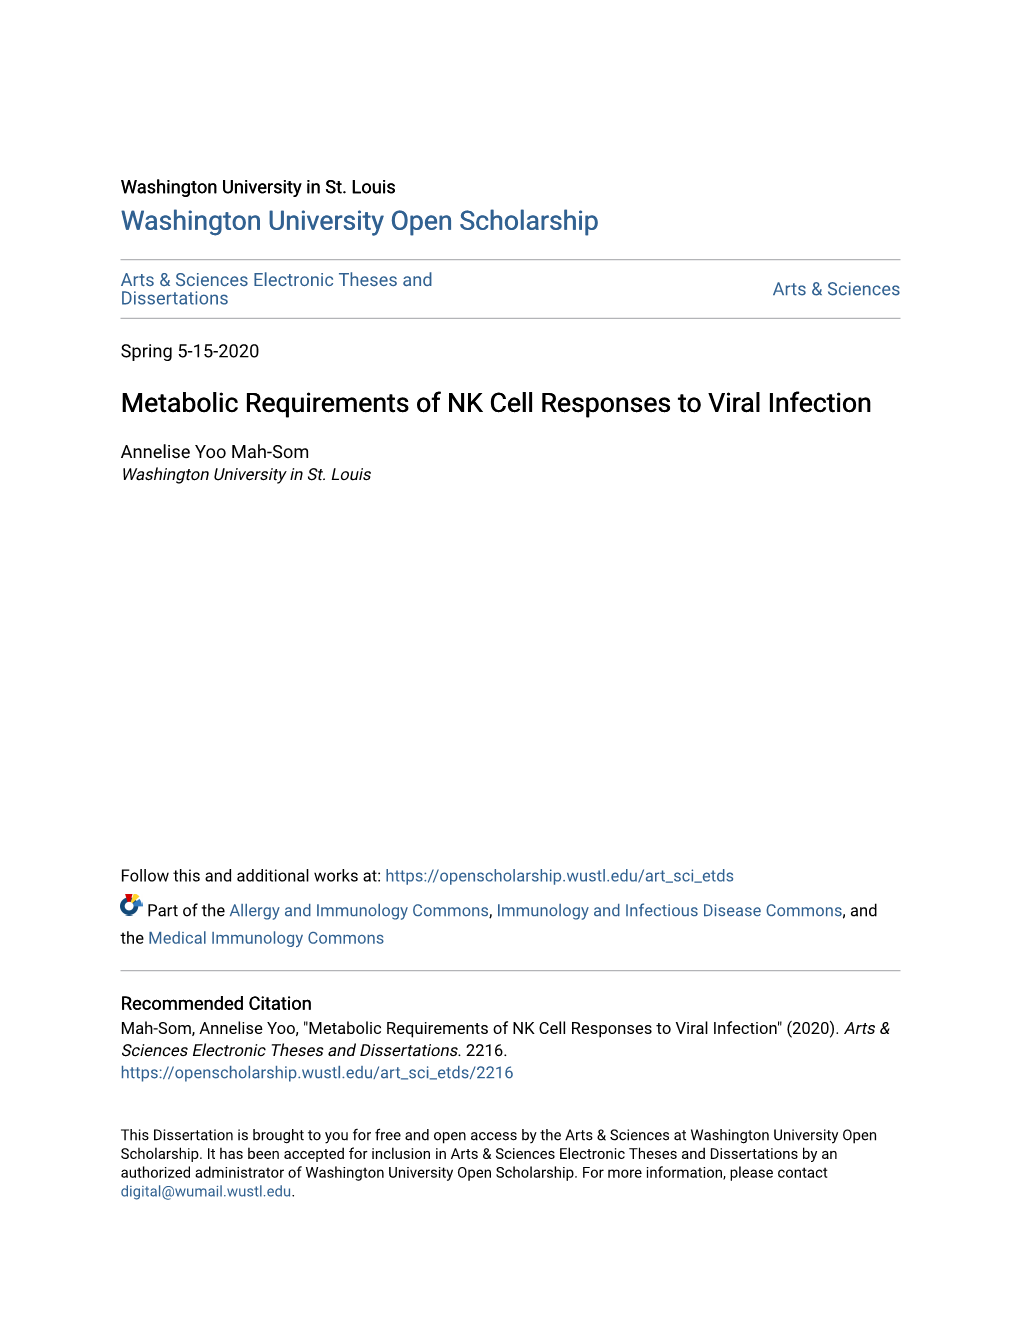 Metabolic Requirements of NK Cell Responses to Viral Infection